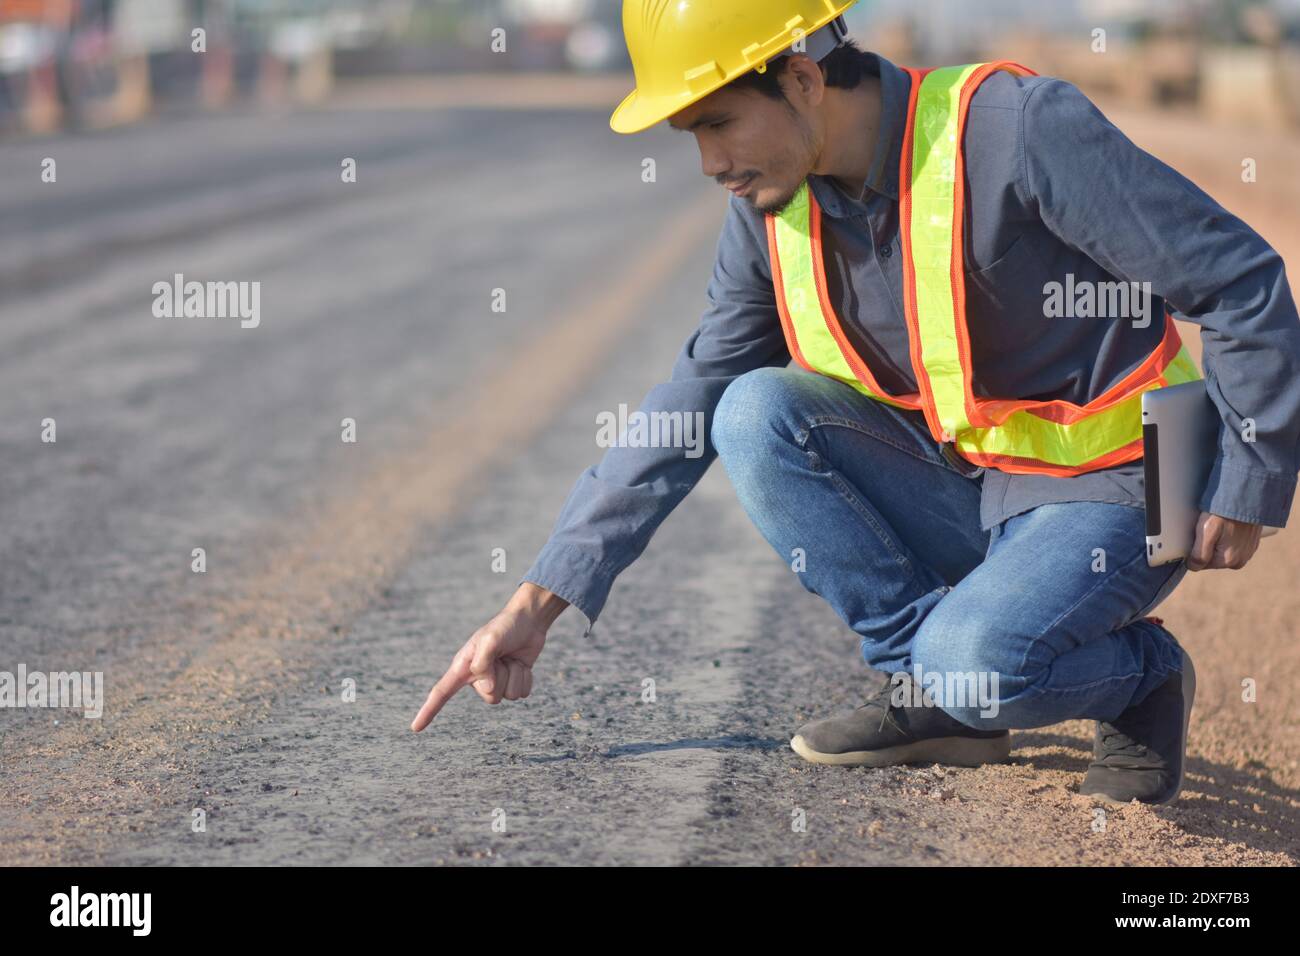 Engineering hold tablet is checking  surface of road in the road construction area. Land transportation system Stock Photo